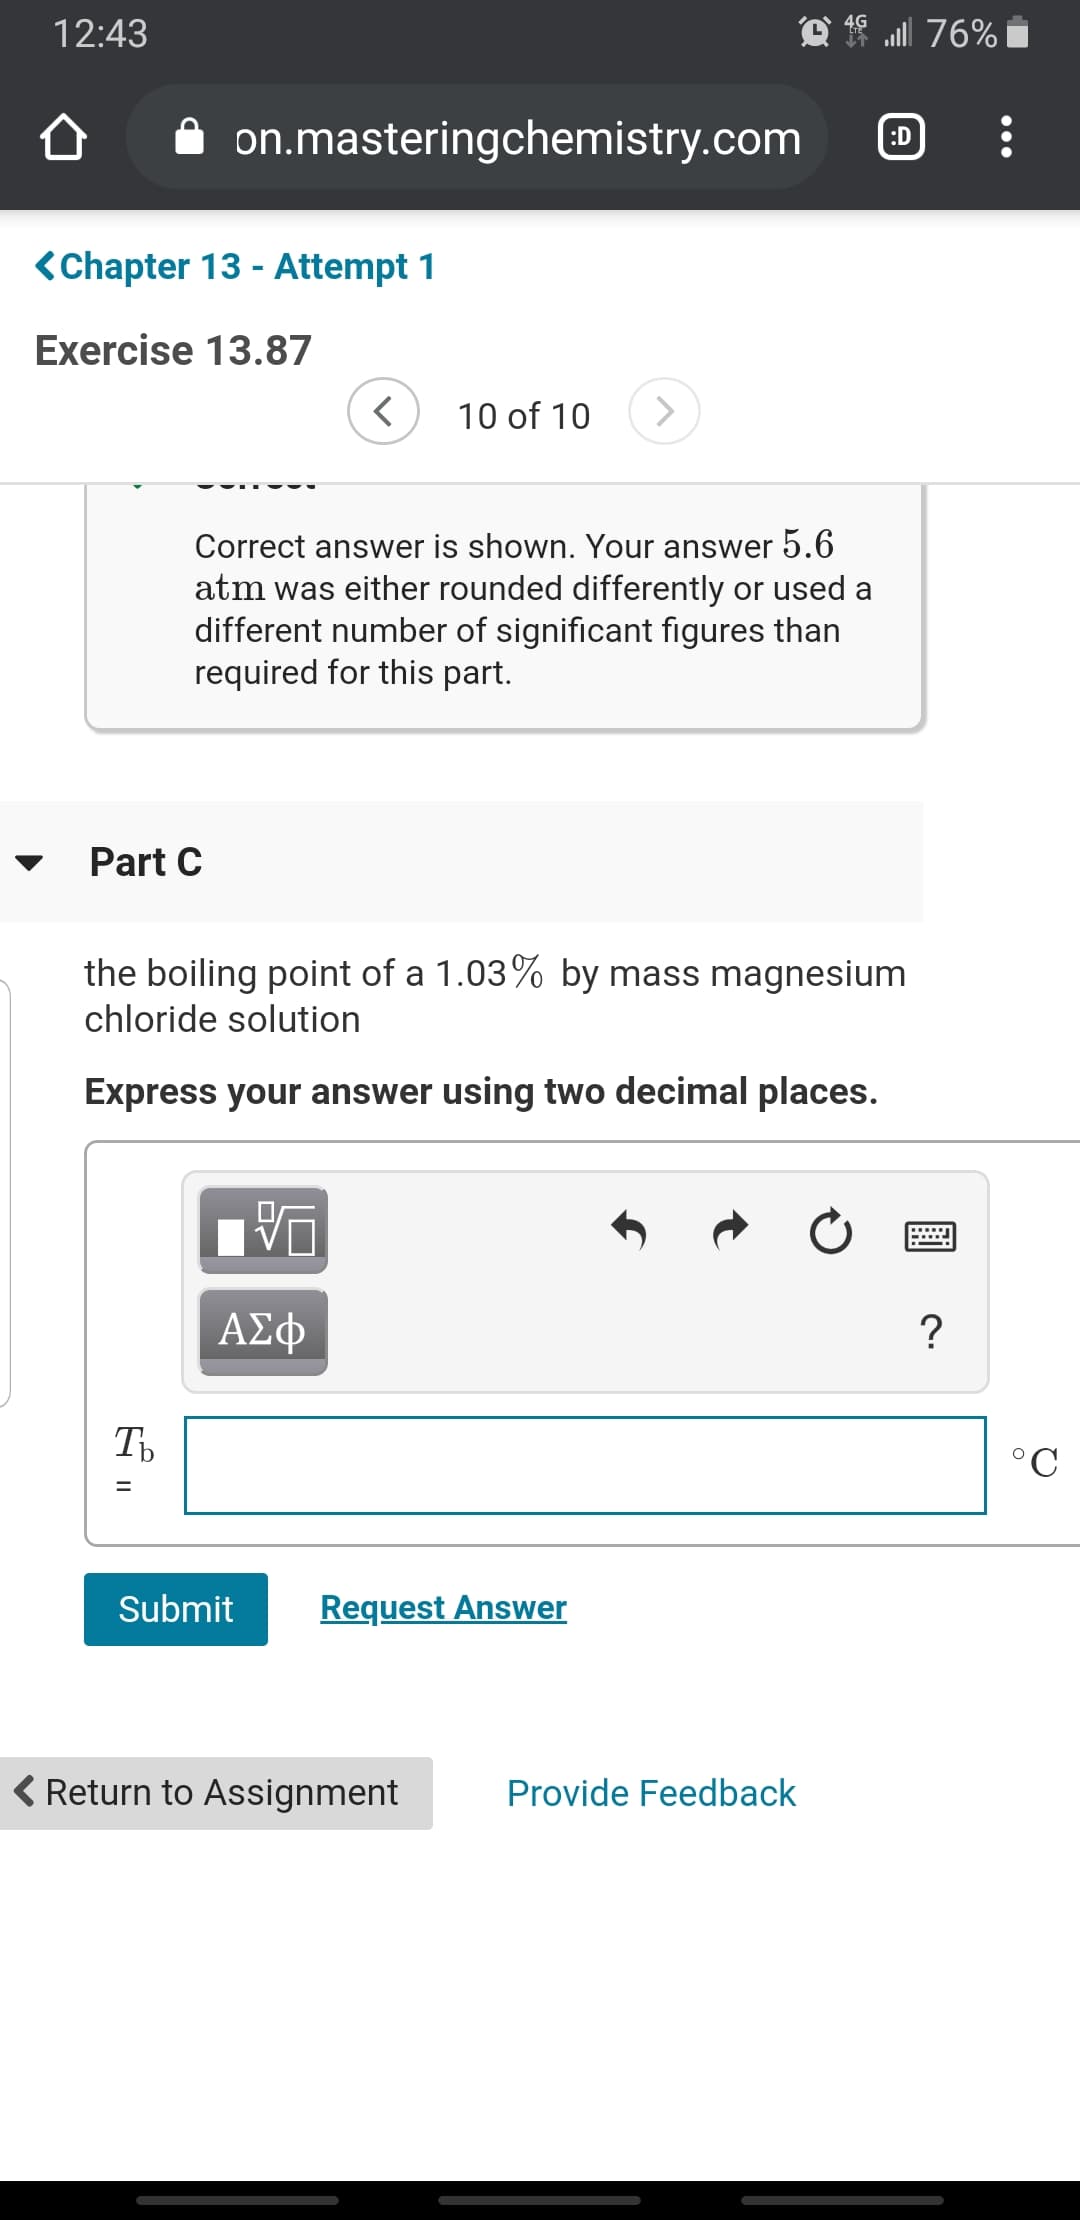 f ull 76%
12:43
on.masteringchemistry.com
:D
<Chapter 13 - Attempt 1
Exercise 13.87
<>
10 of 10
Correct answer is shown. Your answer 5.6
atm was either rounded differently or used a
different number of significant figures than
required for this part.
Part C
the boiling point of a 1.03% by mass magnesium
chloride solution
Express your answer using two decimal places.
ΑΣφ
°C
Request Answer
Submit
( Return to Assignment
Provide Feedback
